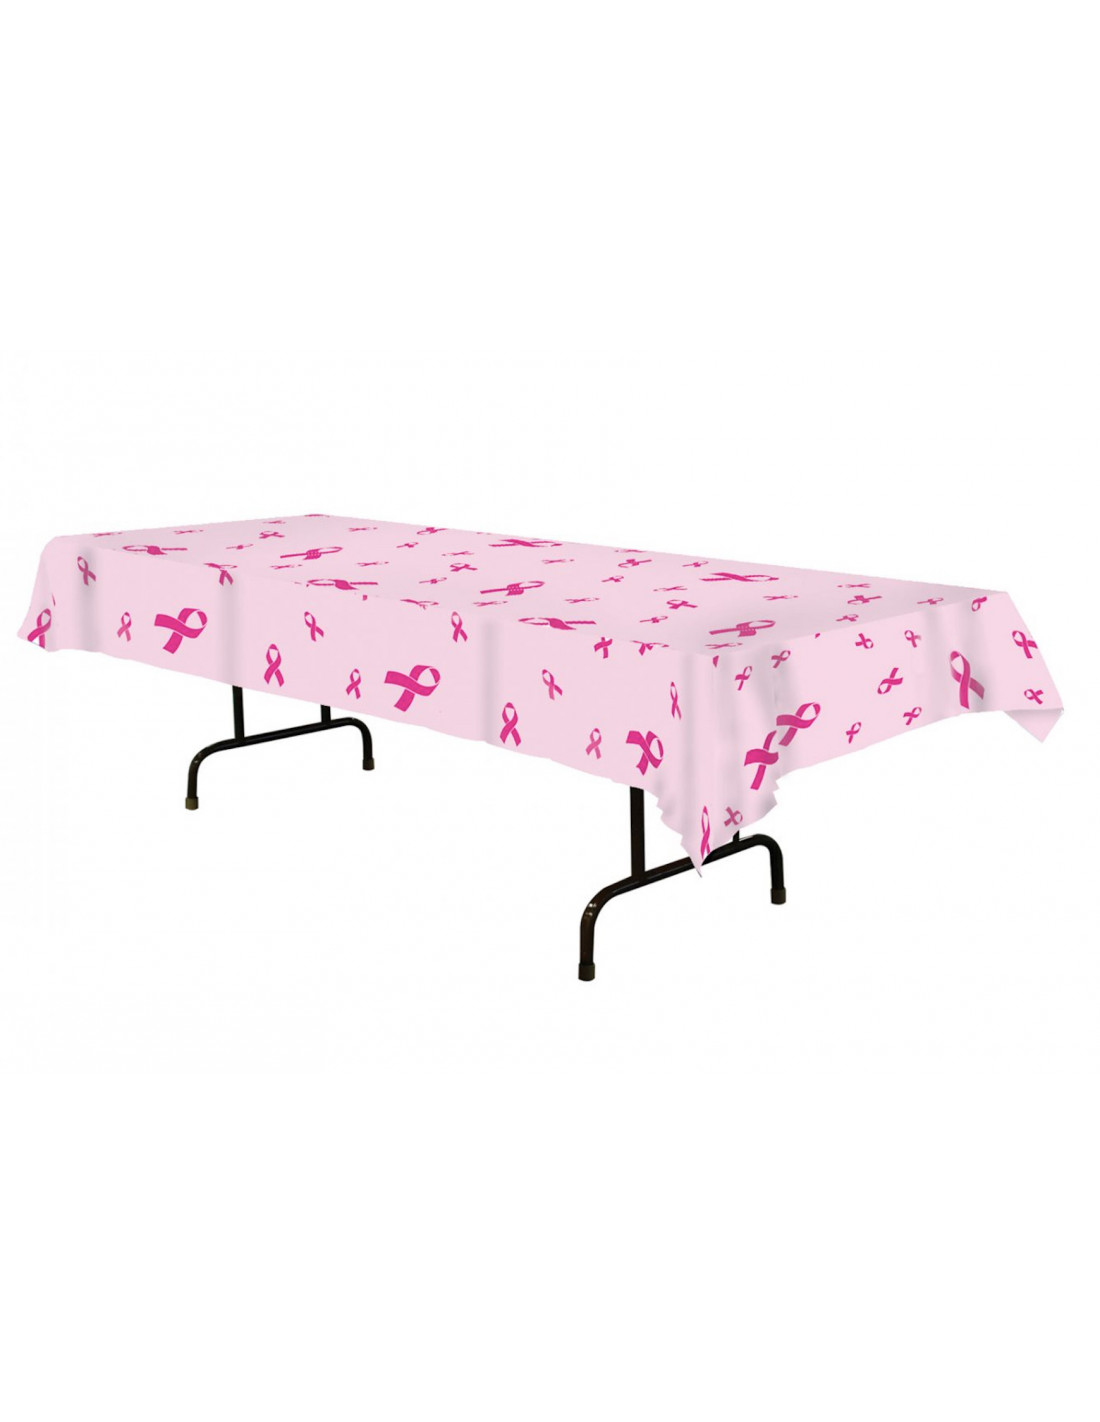 Nappe jetable